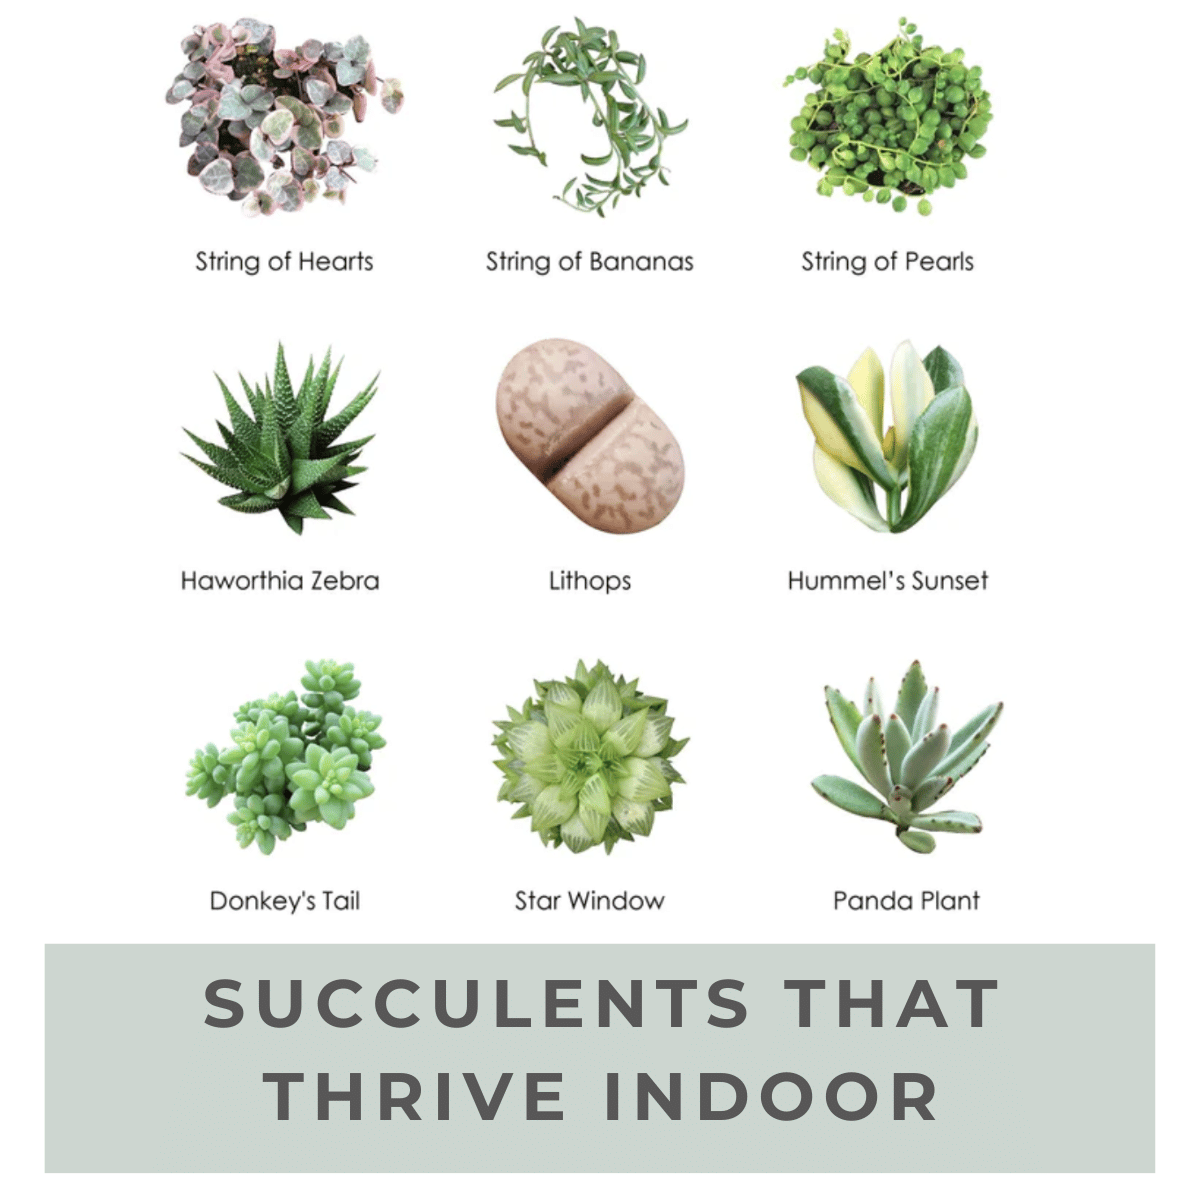 How Much Light Do Succulents Require? - Succulents That Thrive Indoor